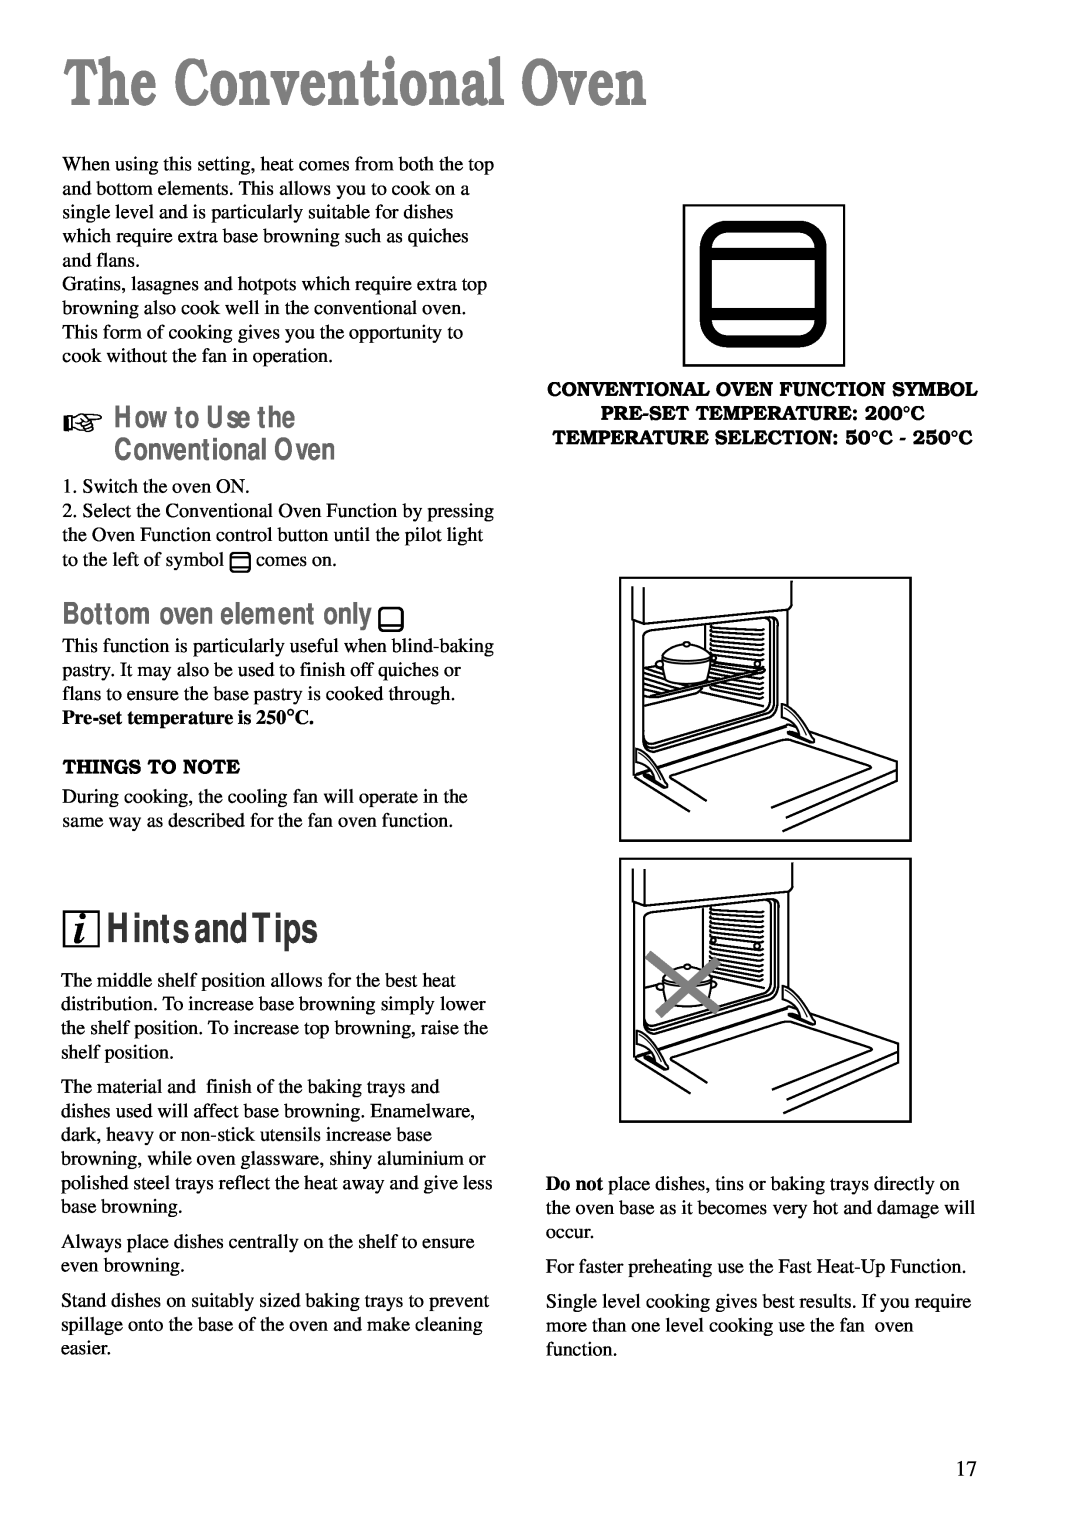 Zanussi ZBM 878 manual The Conventional Oven, Bottom oven element only, How to Use the Conventional Oven, i Hints andTips 